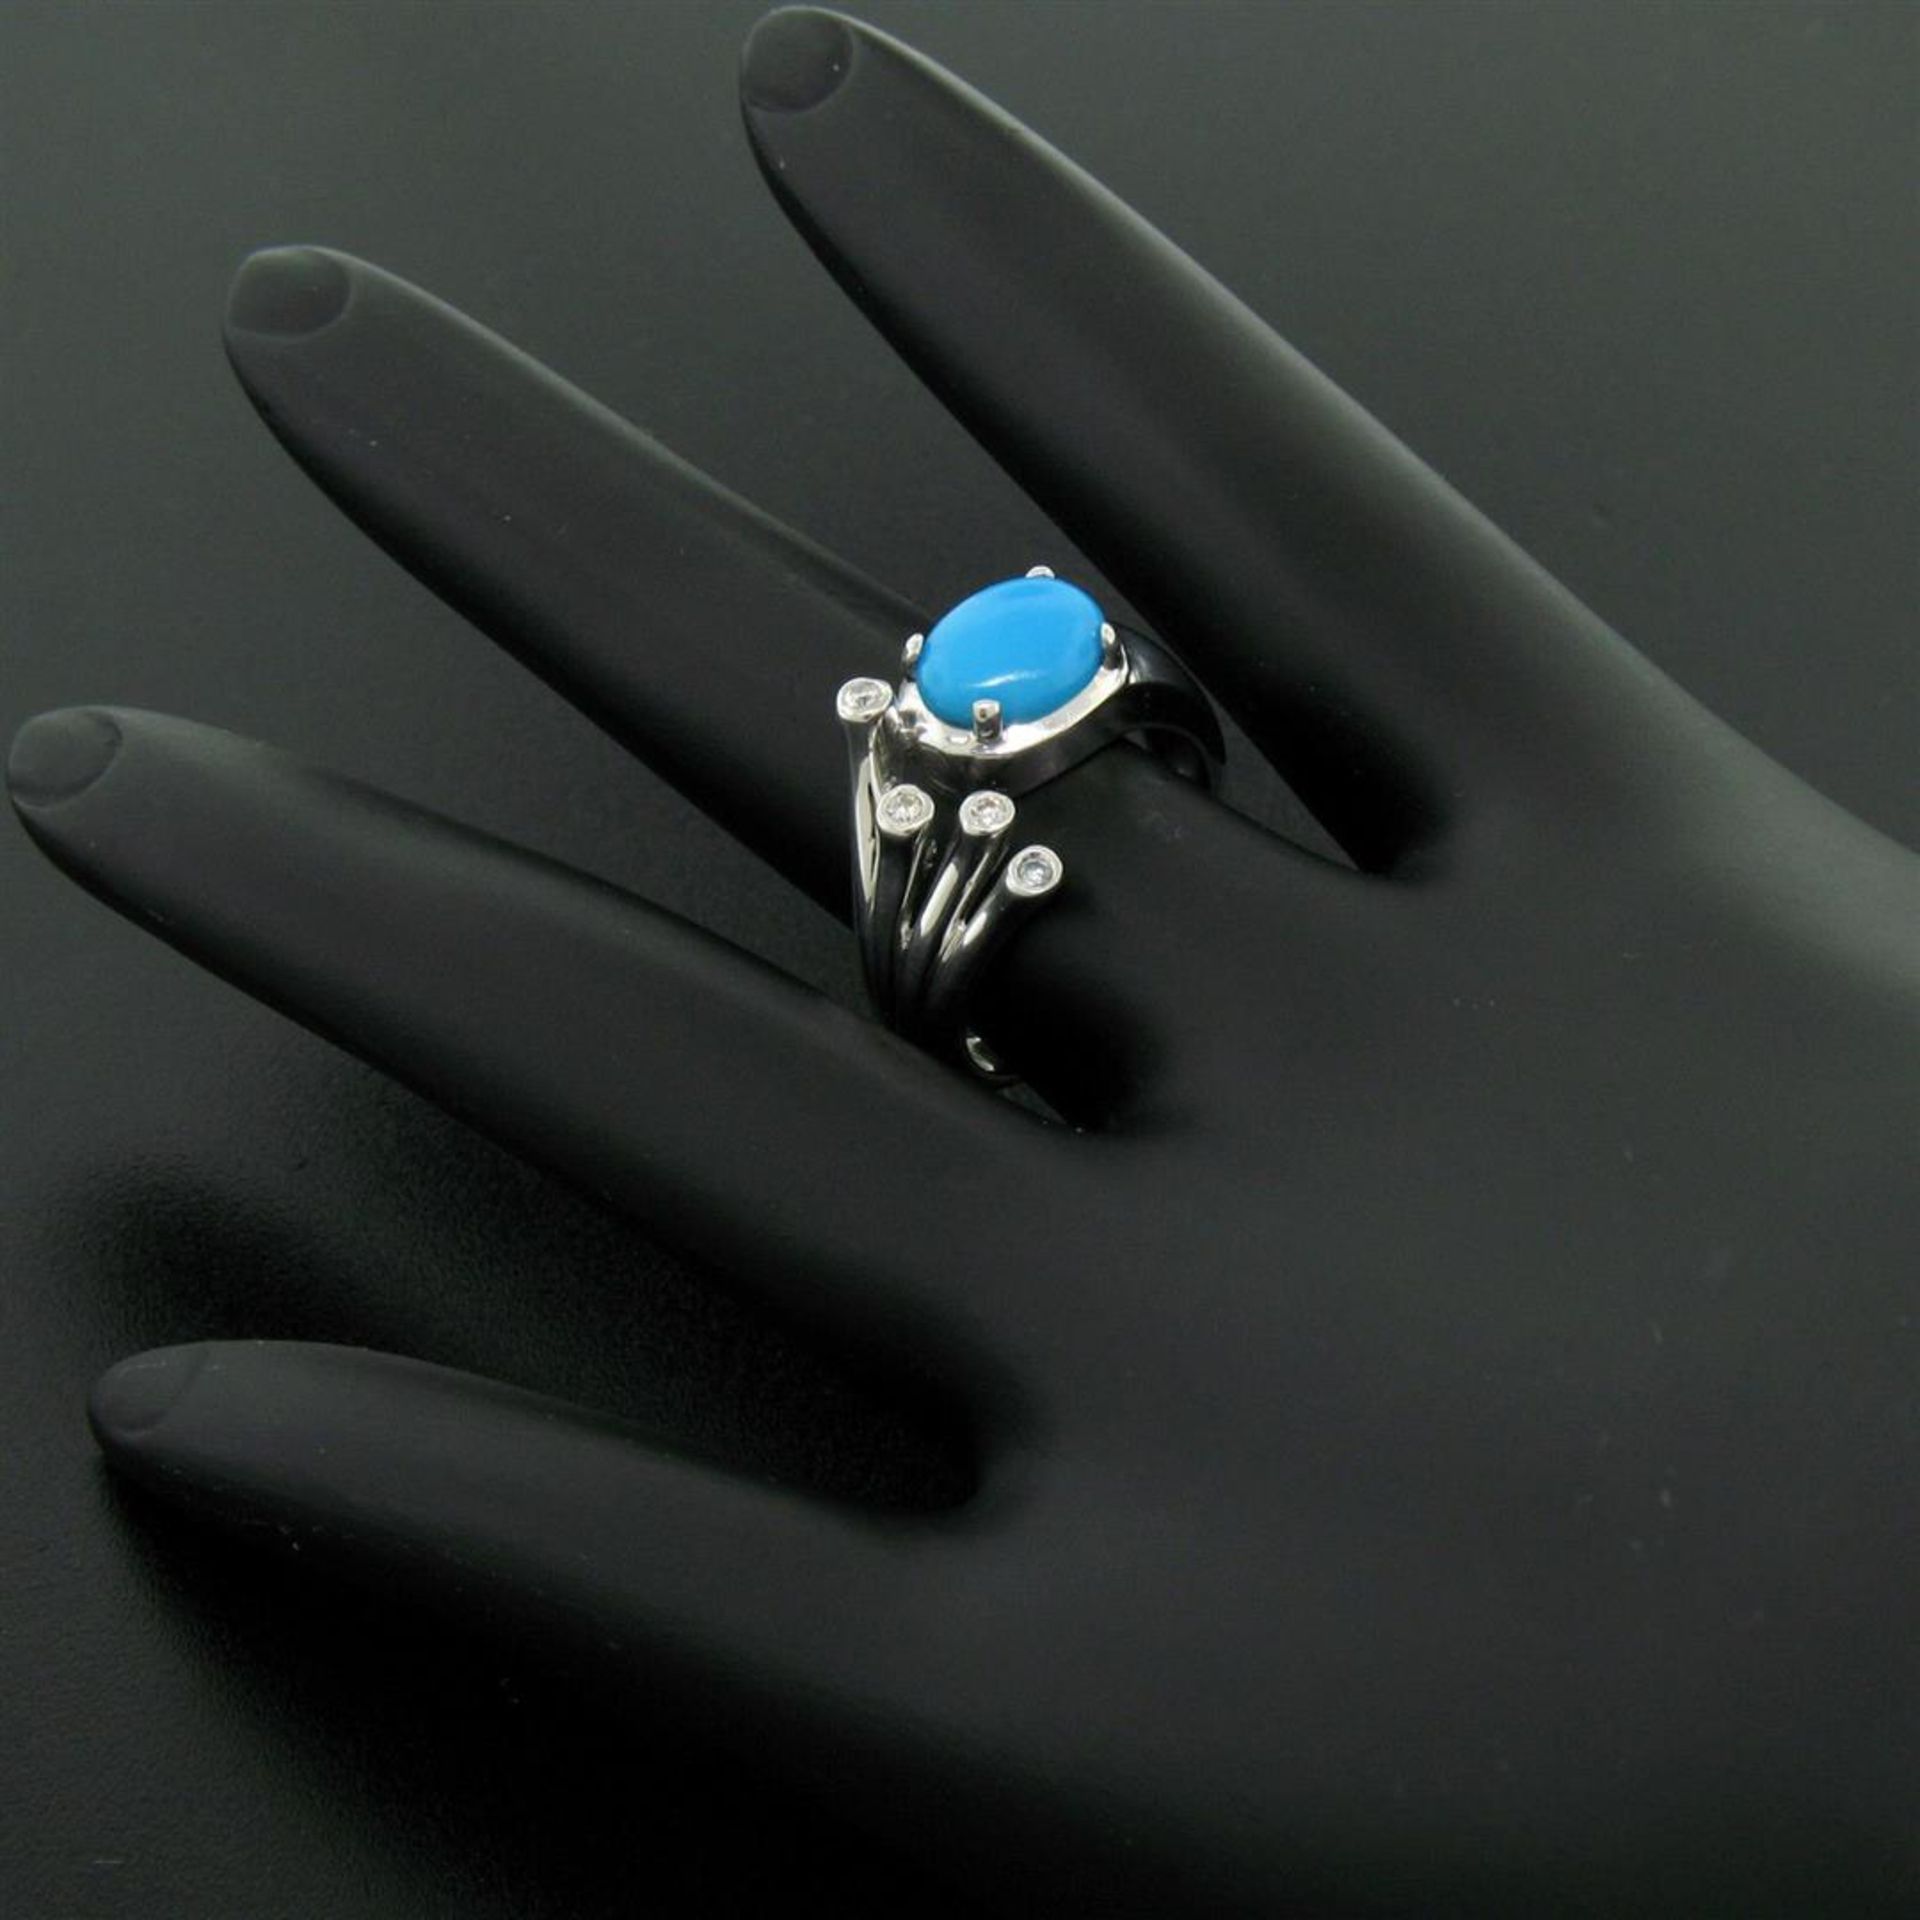 14kt White Gold 1.23 ctw Cabochon Turquoise and Diamond Cocktail Ring - Image 2 of 7